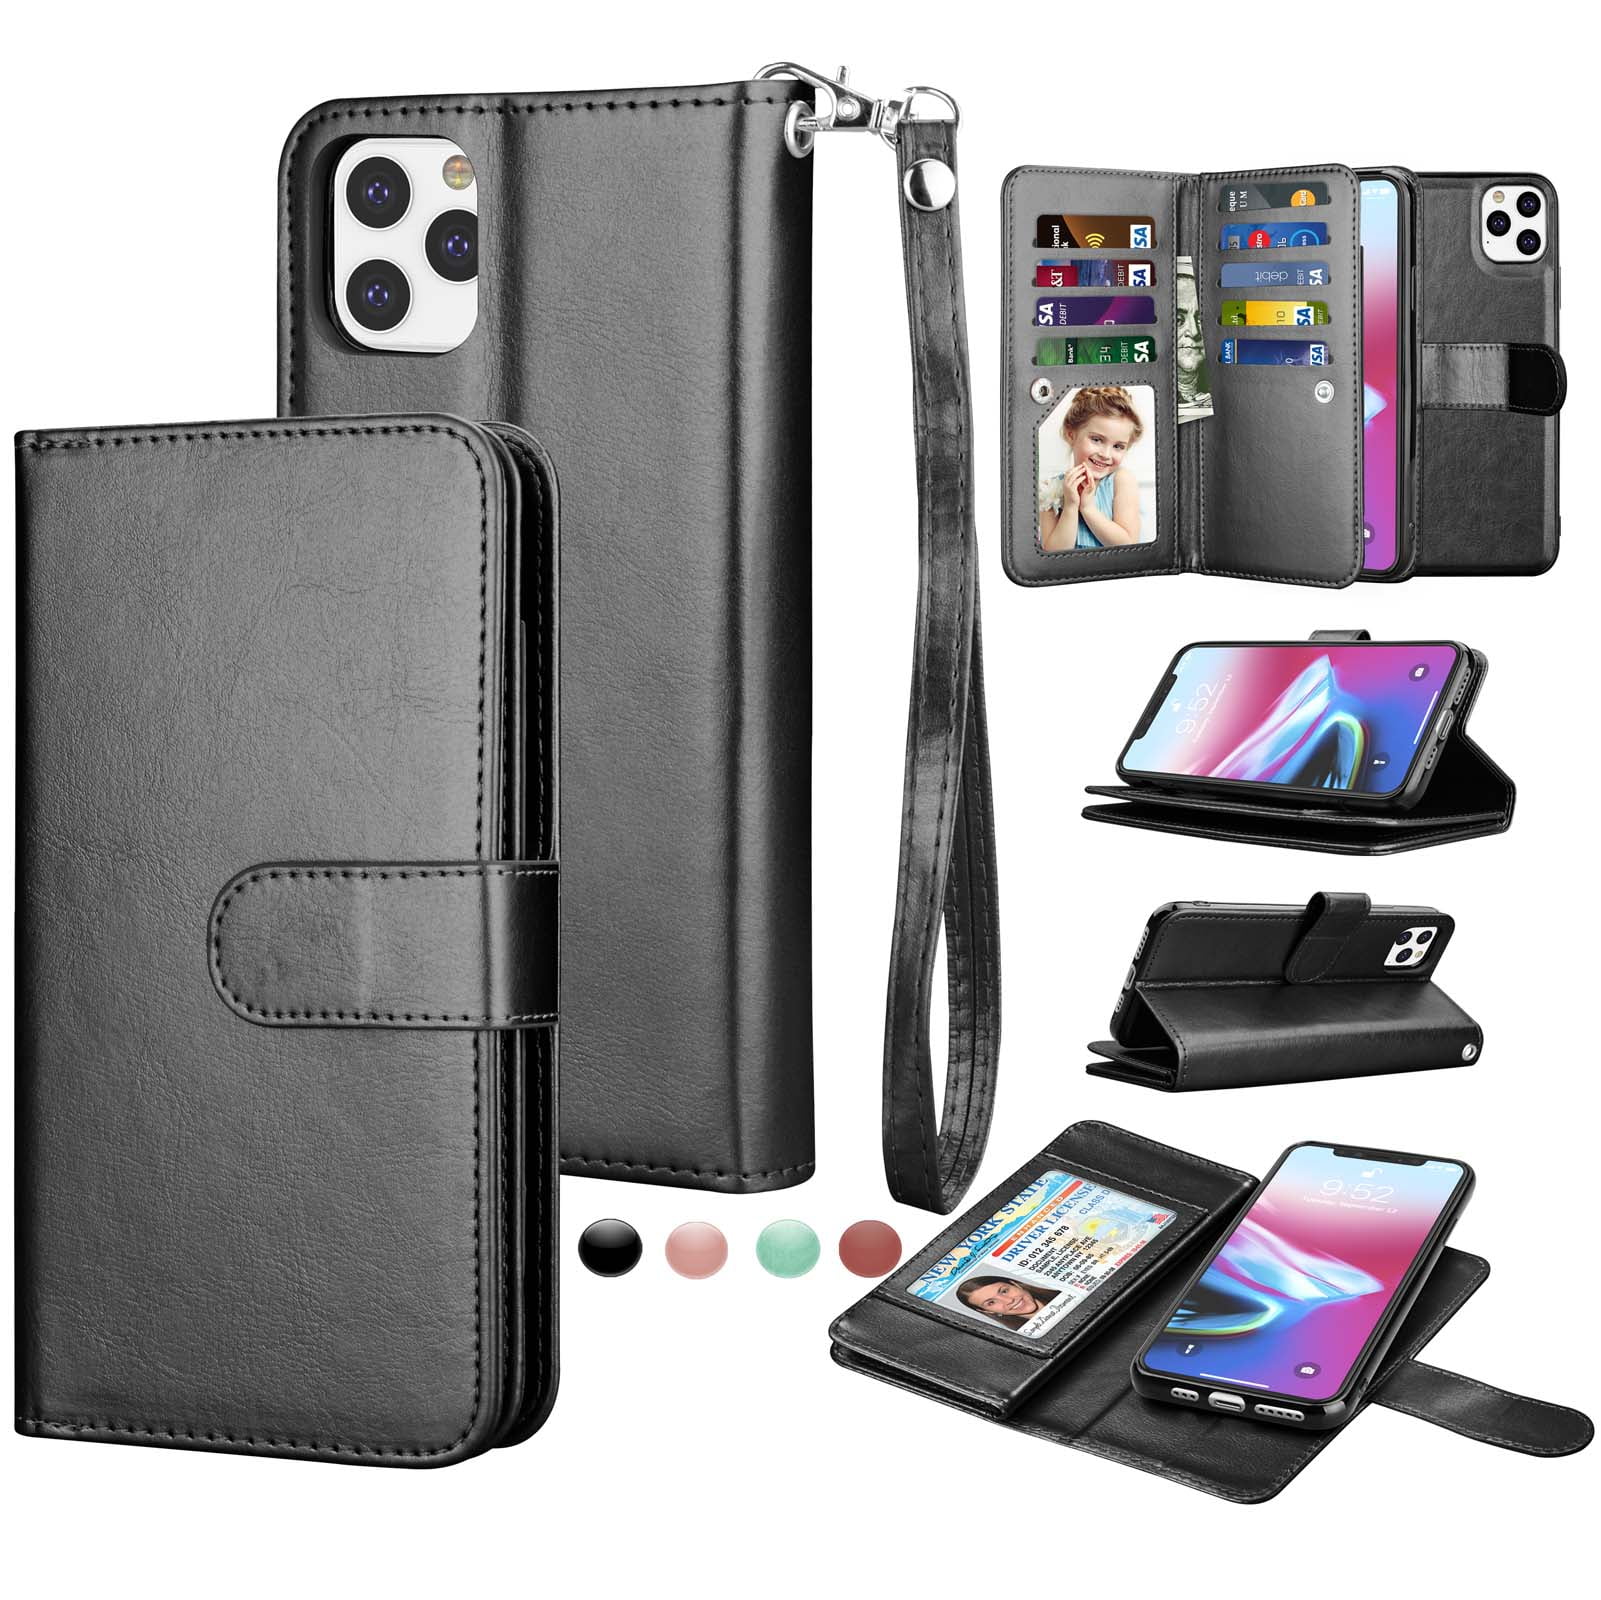 Shockproof Leather Flip Case for iPhone 11 Pro Business Wallet Cover Compatible with iPhone 11 Pro Smartphone 